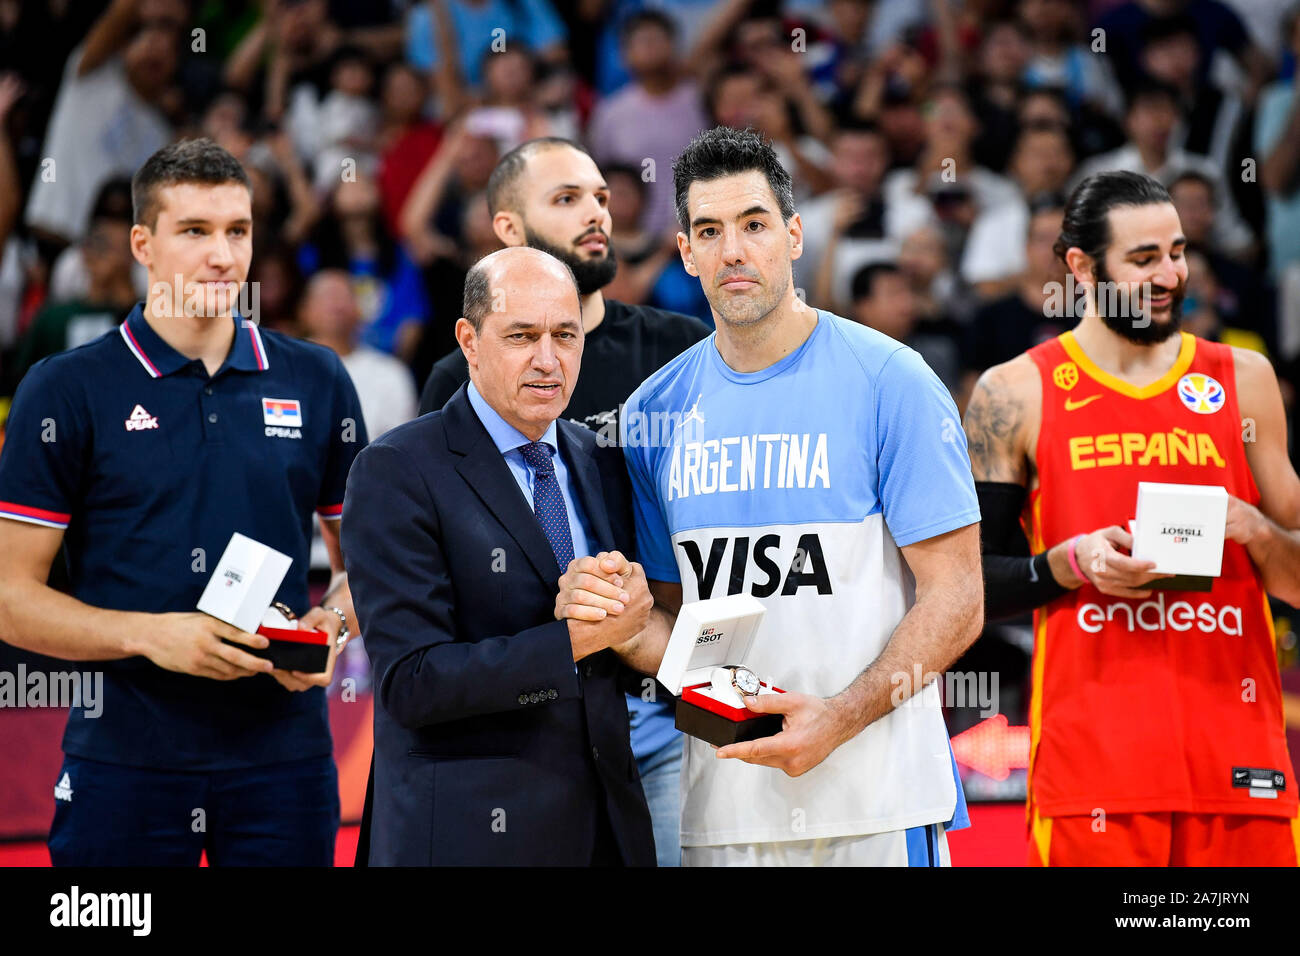 Argentina professional basketball player Luis Scola, front right, are announced to be among the All-Star Five in 2019 FIBA World Cup in Beijing, China Stock Photo